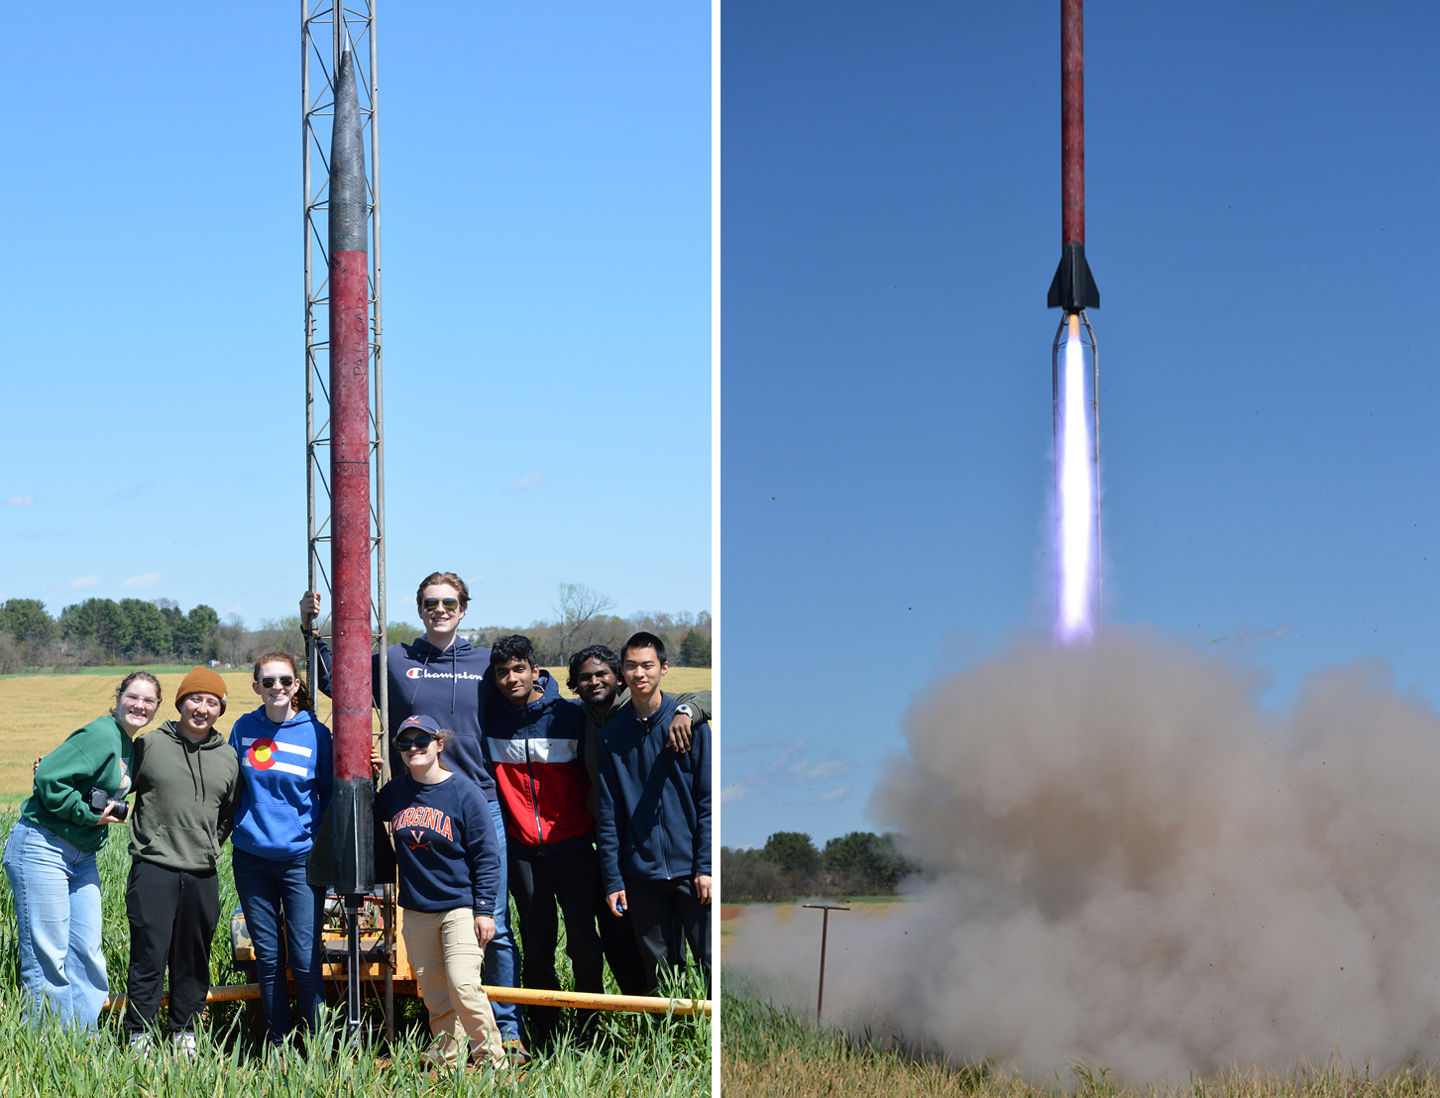 Split screen: On left, group of students posing with rocket on the launch pad. Right, still photo of rocket lifting off.